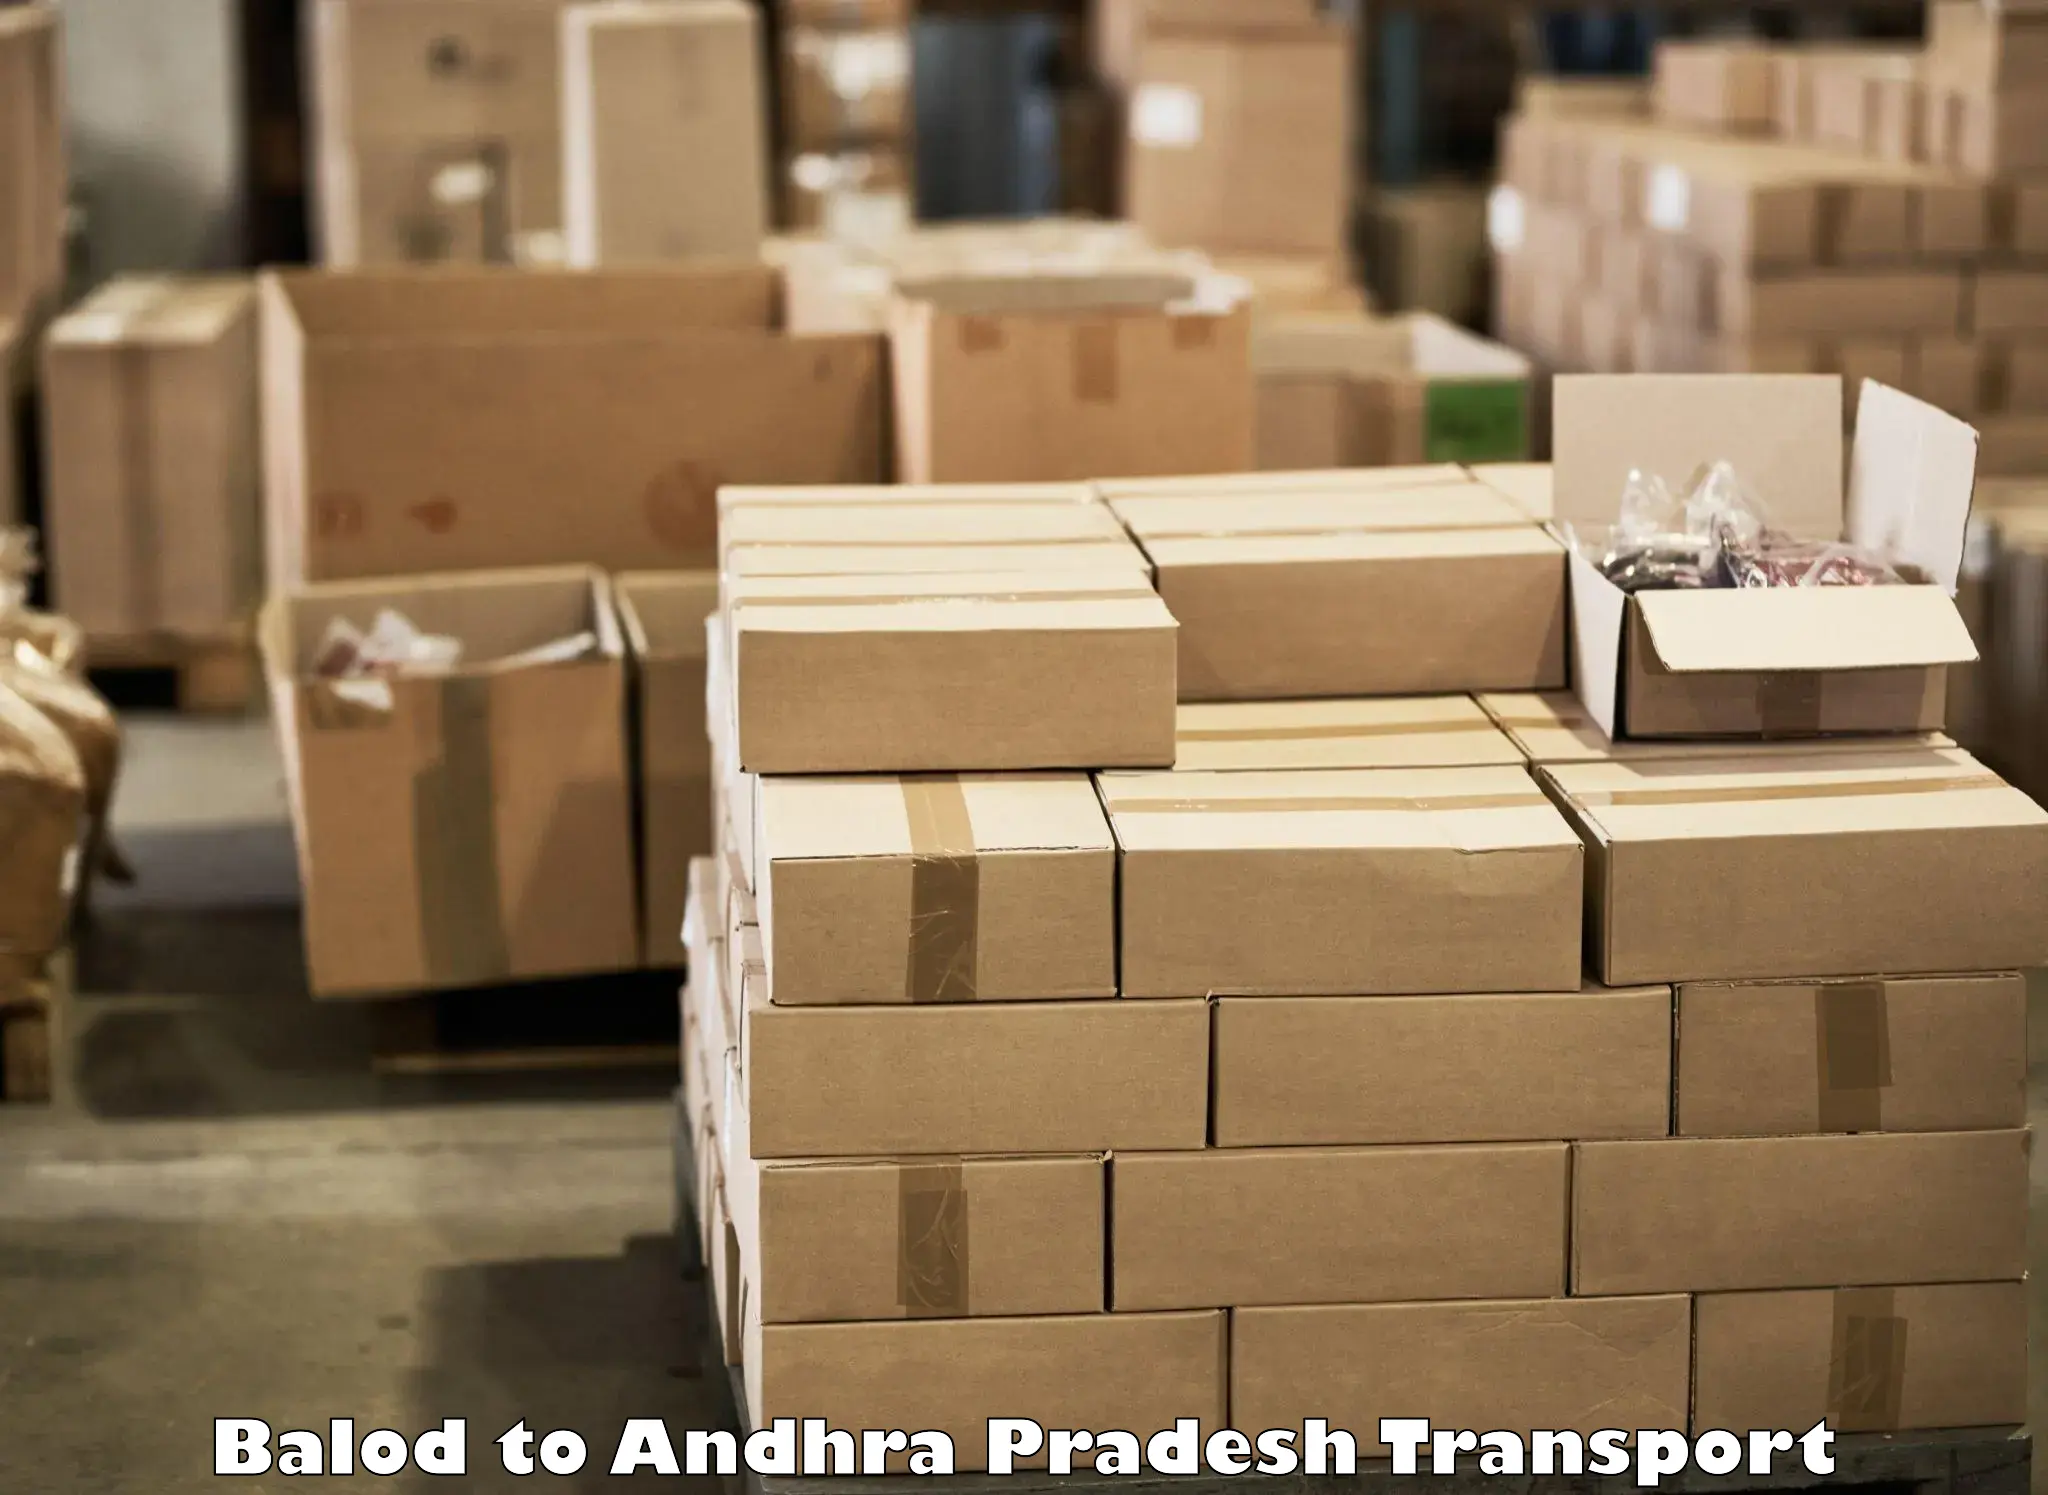 Shipping services in Balod to Gudur